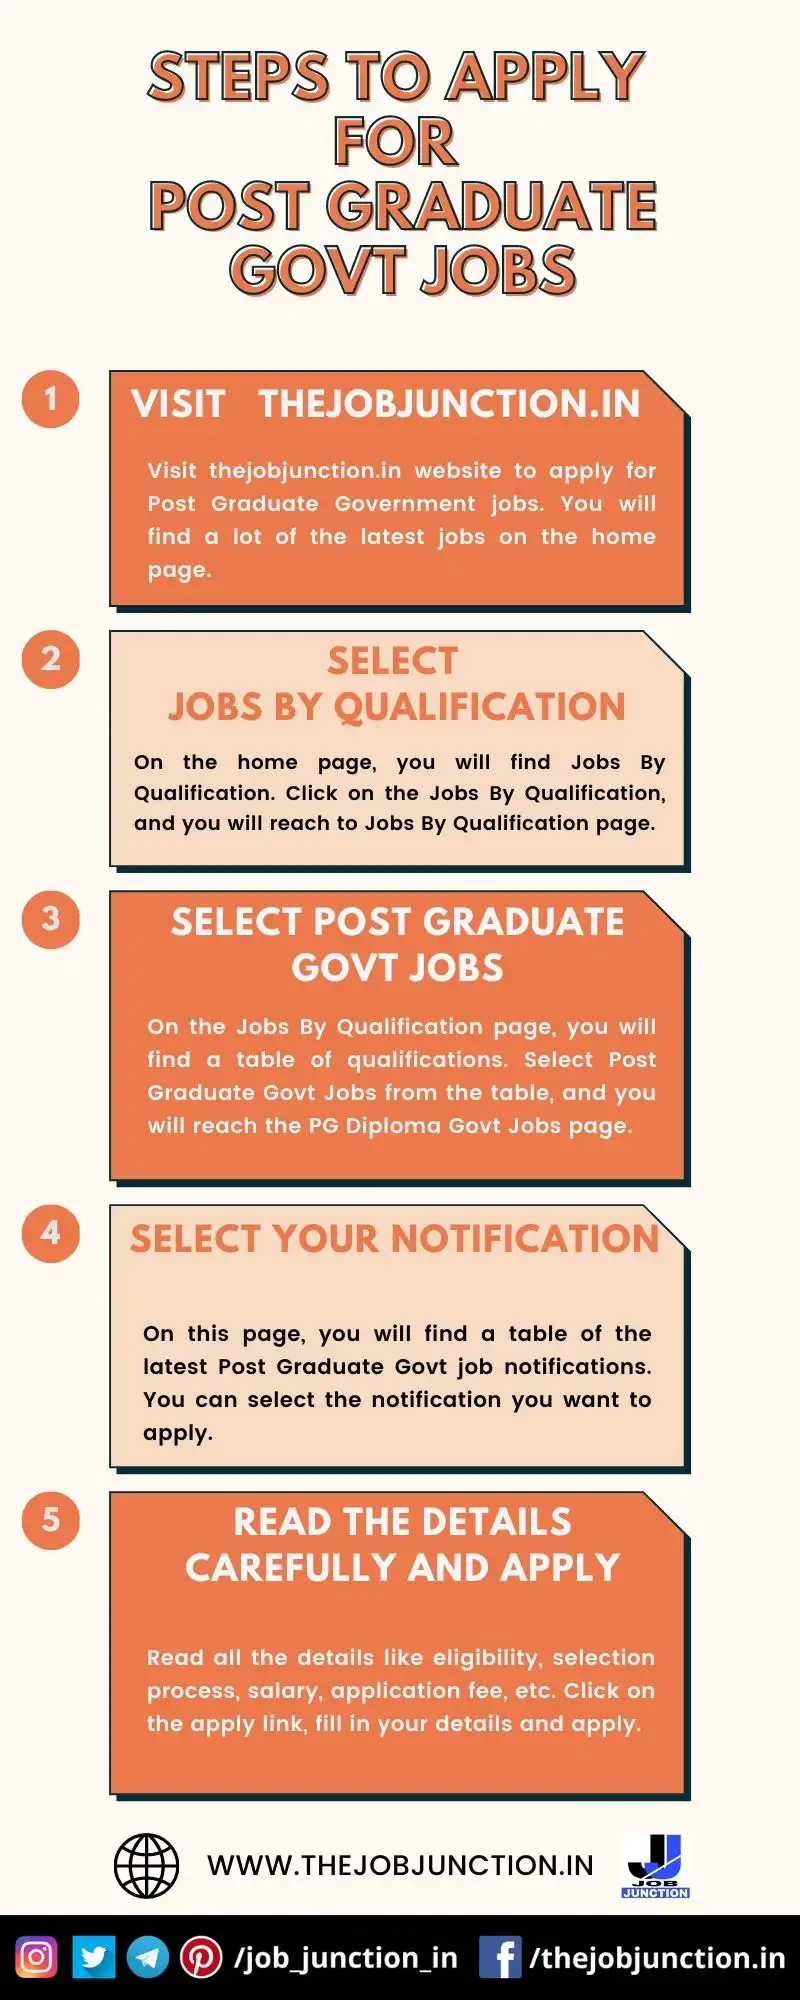 STEPS TO APPLY FOR POST GRADUATE GOVT JOBS